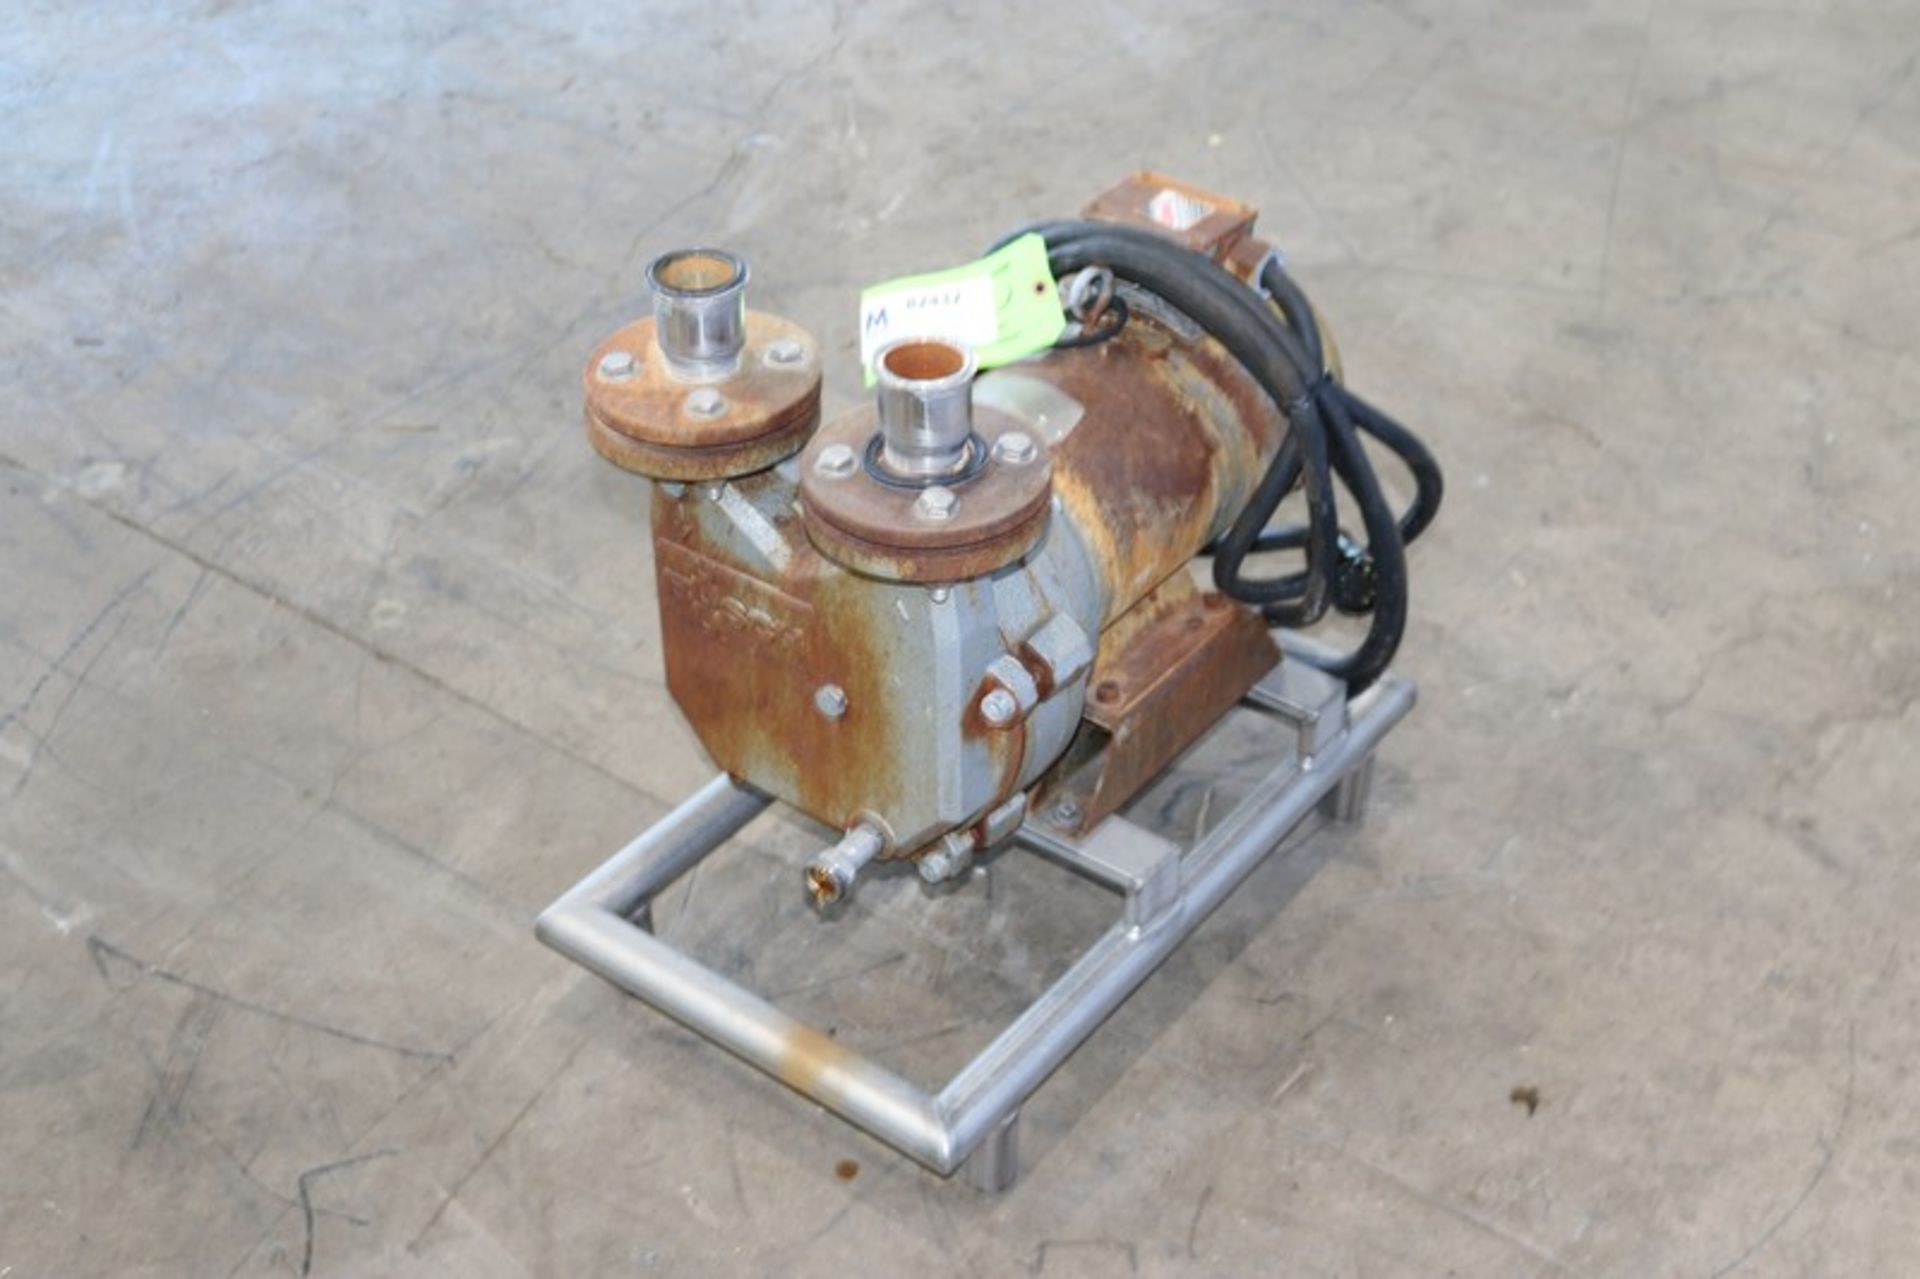 Buusch Vacuum Pump, with Baldor 1755 RPM Motor, 208-230/460 Volts, 3 Phase, with Associated Steam - Image 3 of 5